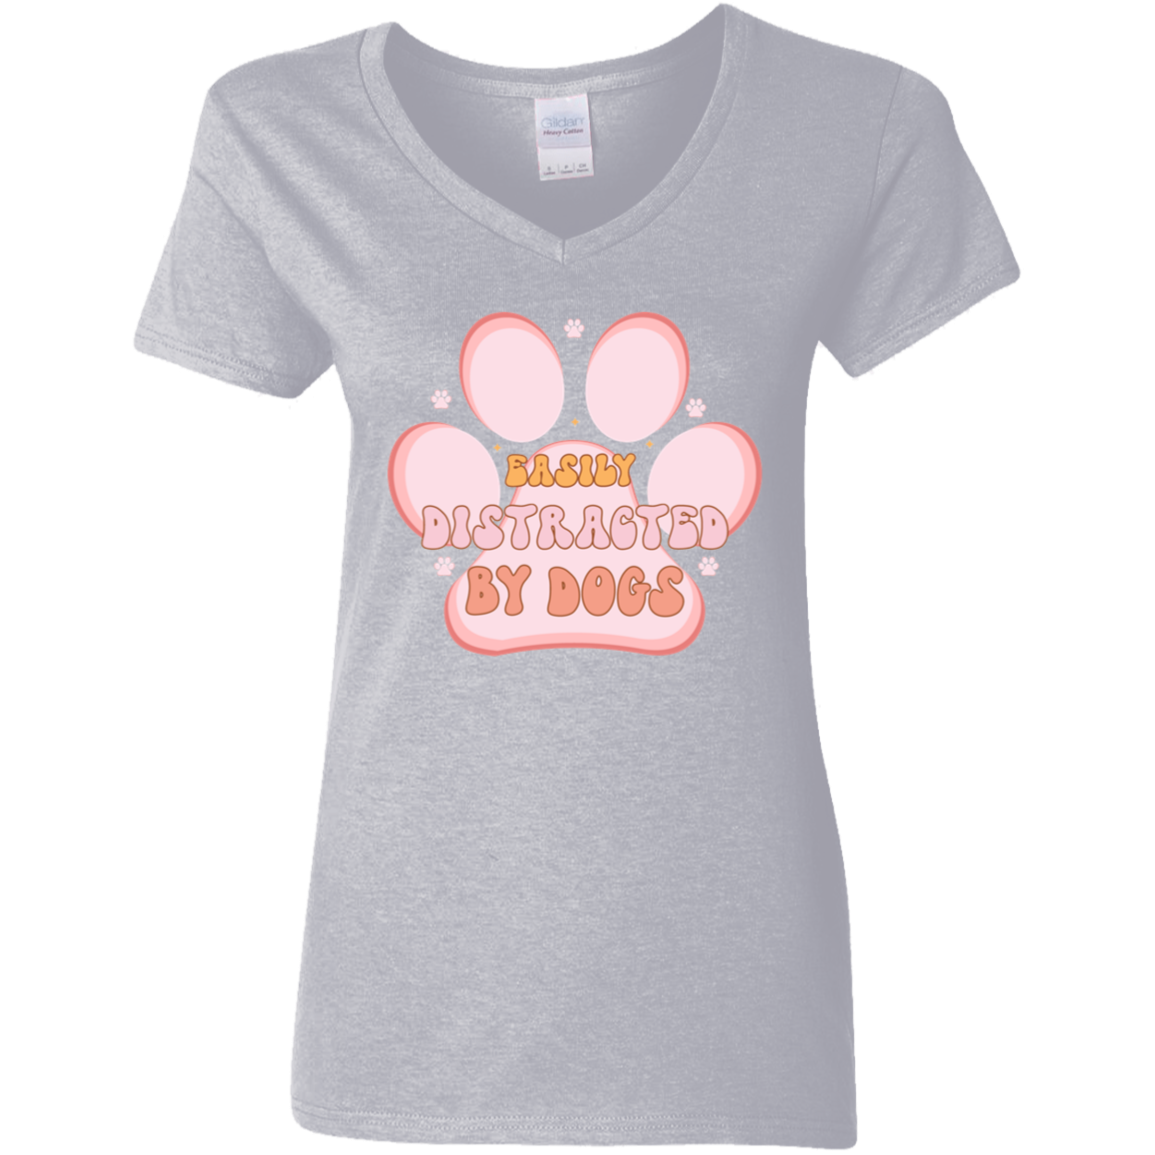 Easily Distracted by Dogs Ladies' V-Neck T-Shirt